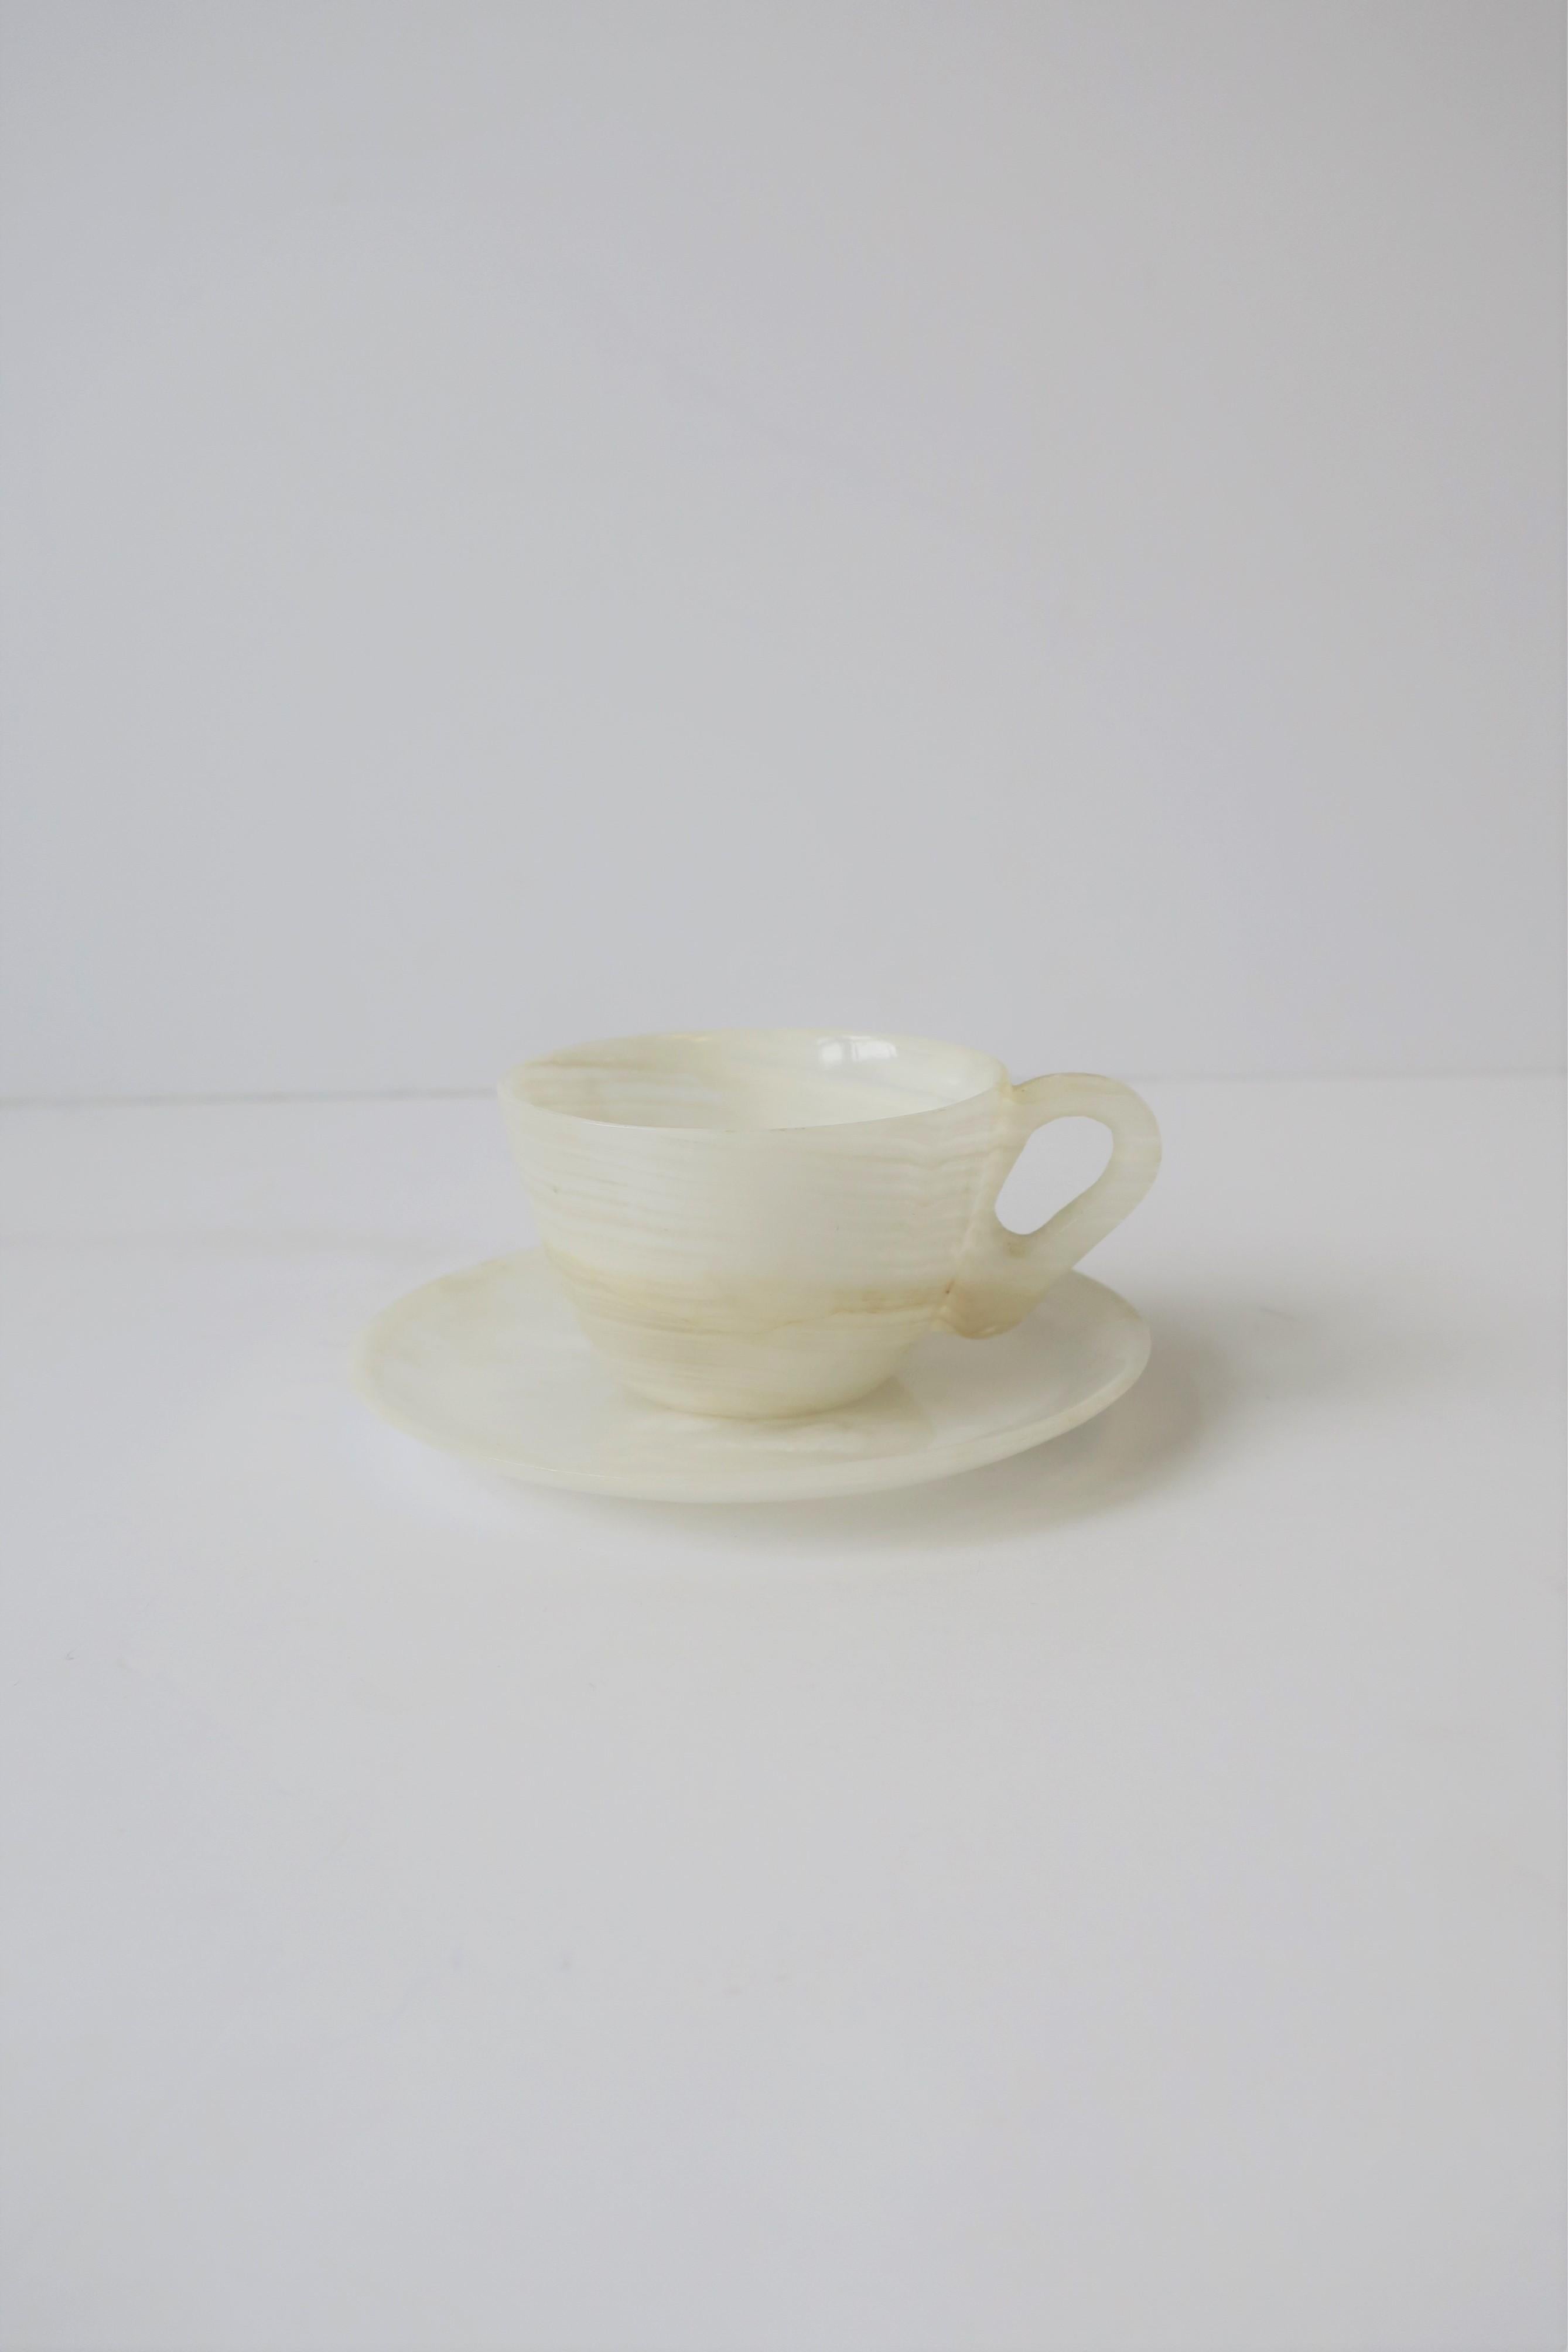 A beautiful Italian white onyx espresso coffee or tea demitasse cup and saucer set, circa 20th century, Italy. Cup and saucer are each made from a single piece of onyx; carved and polished smooth. Colors include: Predominantly white with small